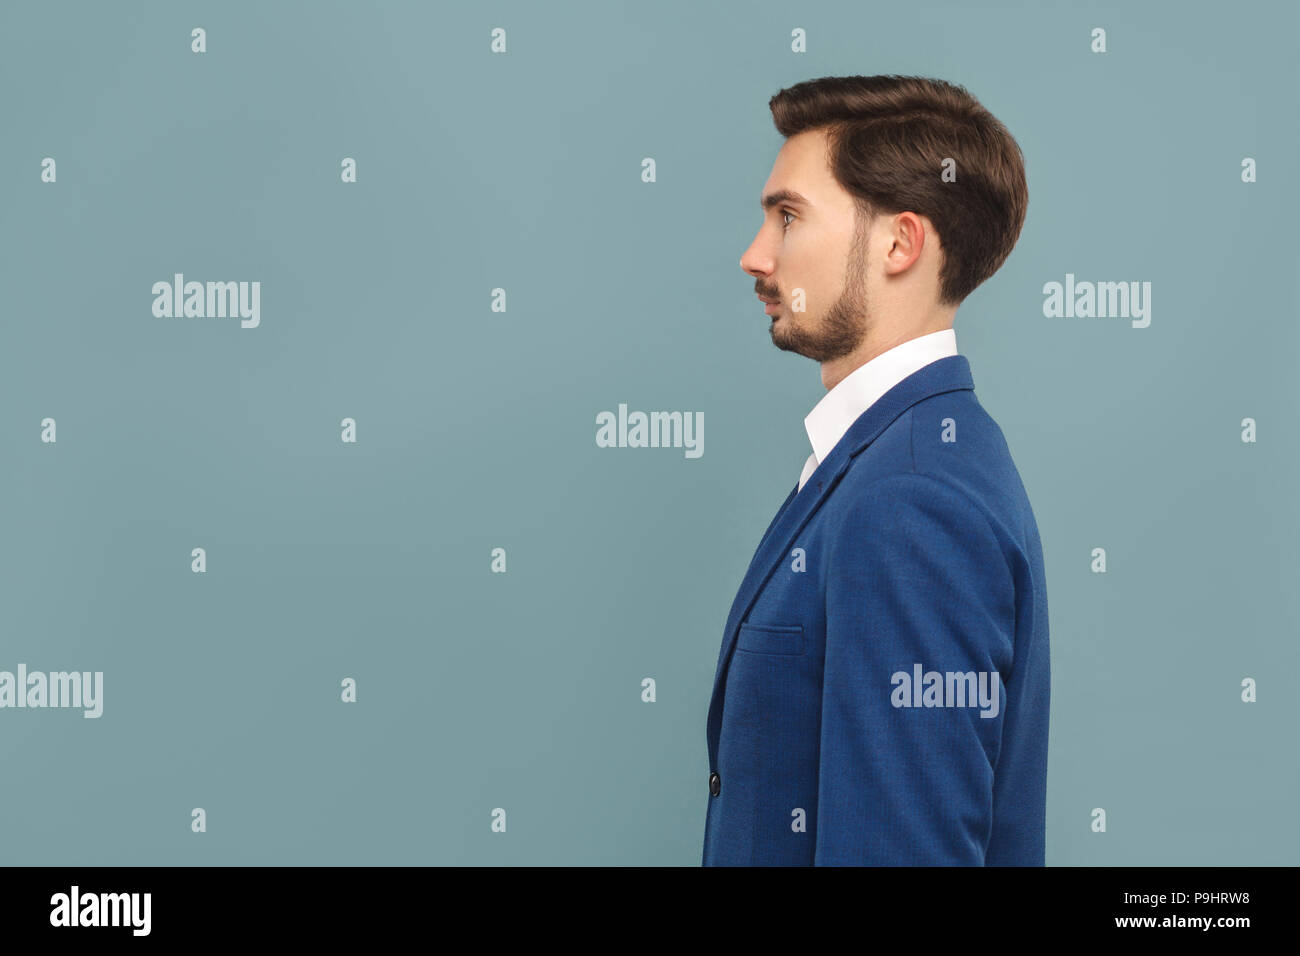 side view or profile view of serious handsome bearded businessman in blue suit and white shirt. Indoor studio shot, isolated on light blue background Stock Photo